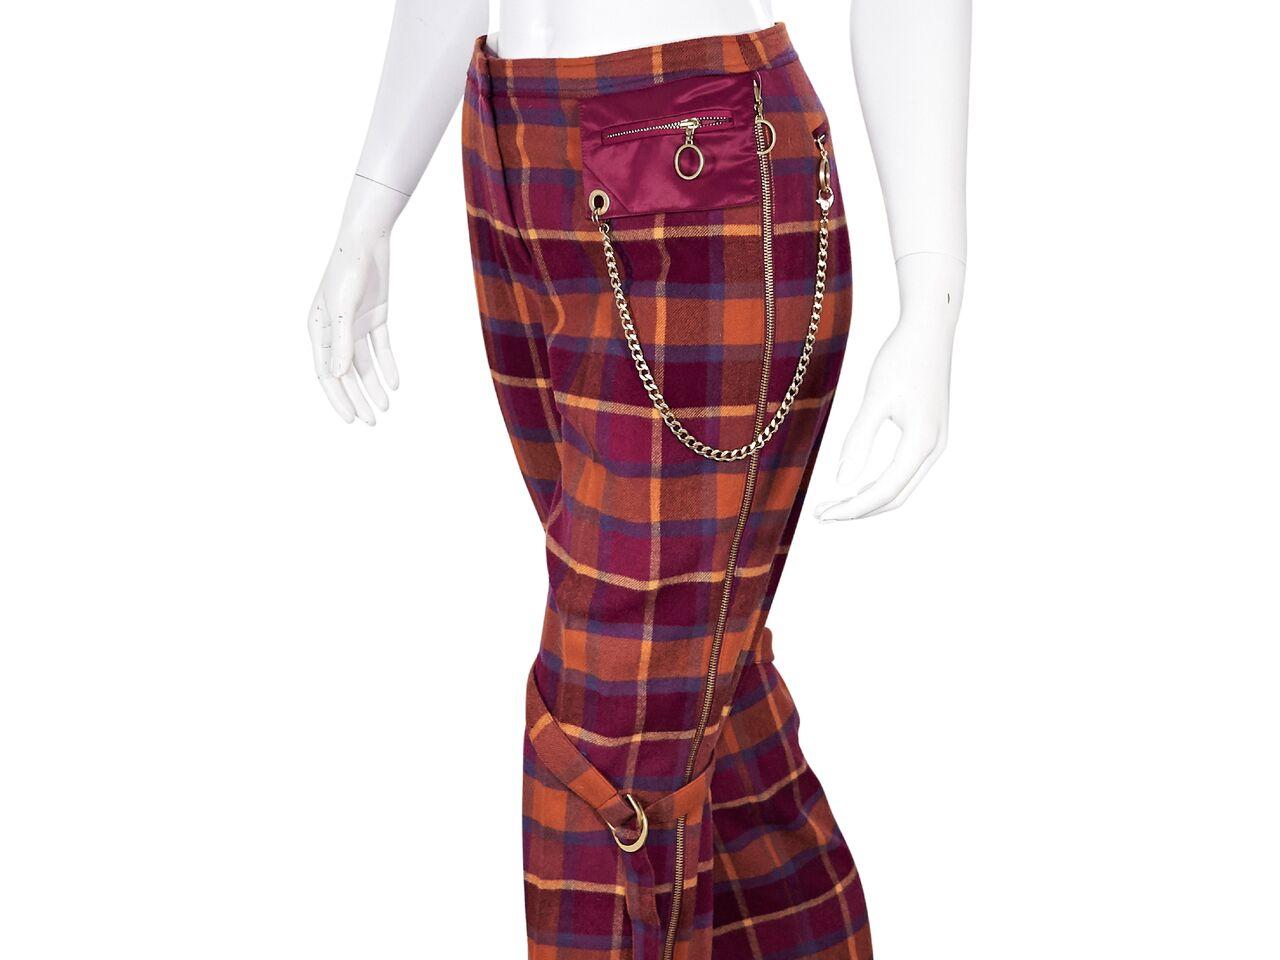 Product details:  Red tartan plaid wool pants by Escada Sport.  Banded waist.  Concealed hook and zip fly closure.  Side zip pocket with chain detail.  Adjustable straps at knees.  Side zipper placket accent.  Pull-on style.  Goldtone hardware.  31